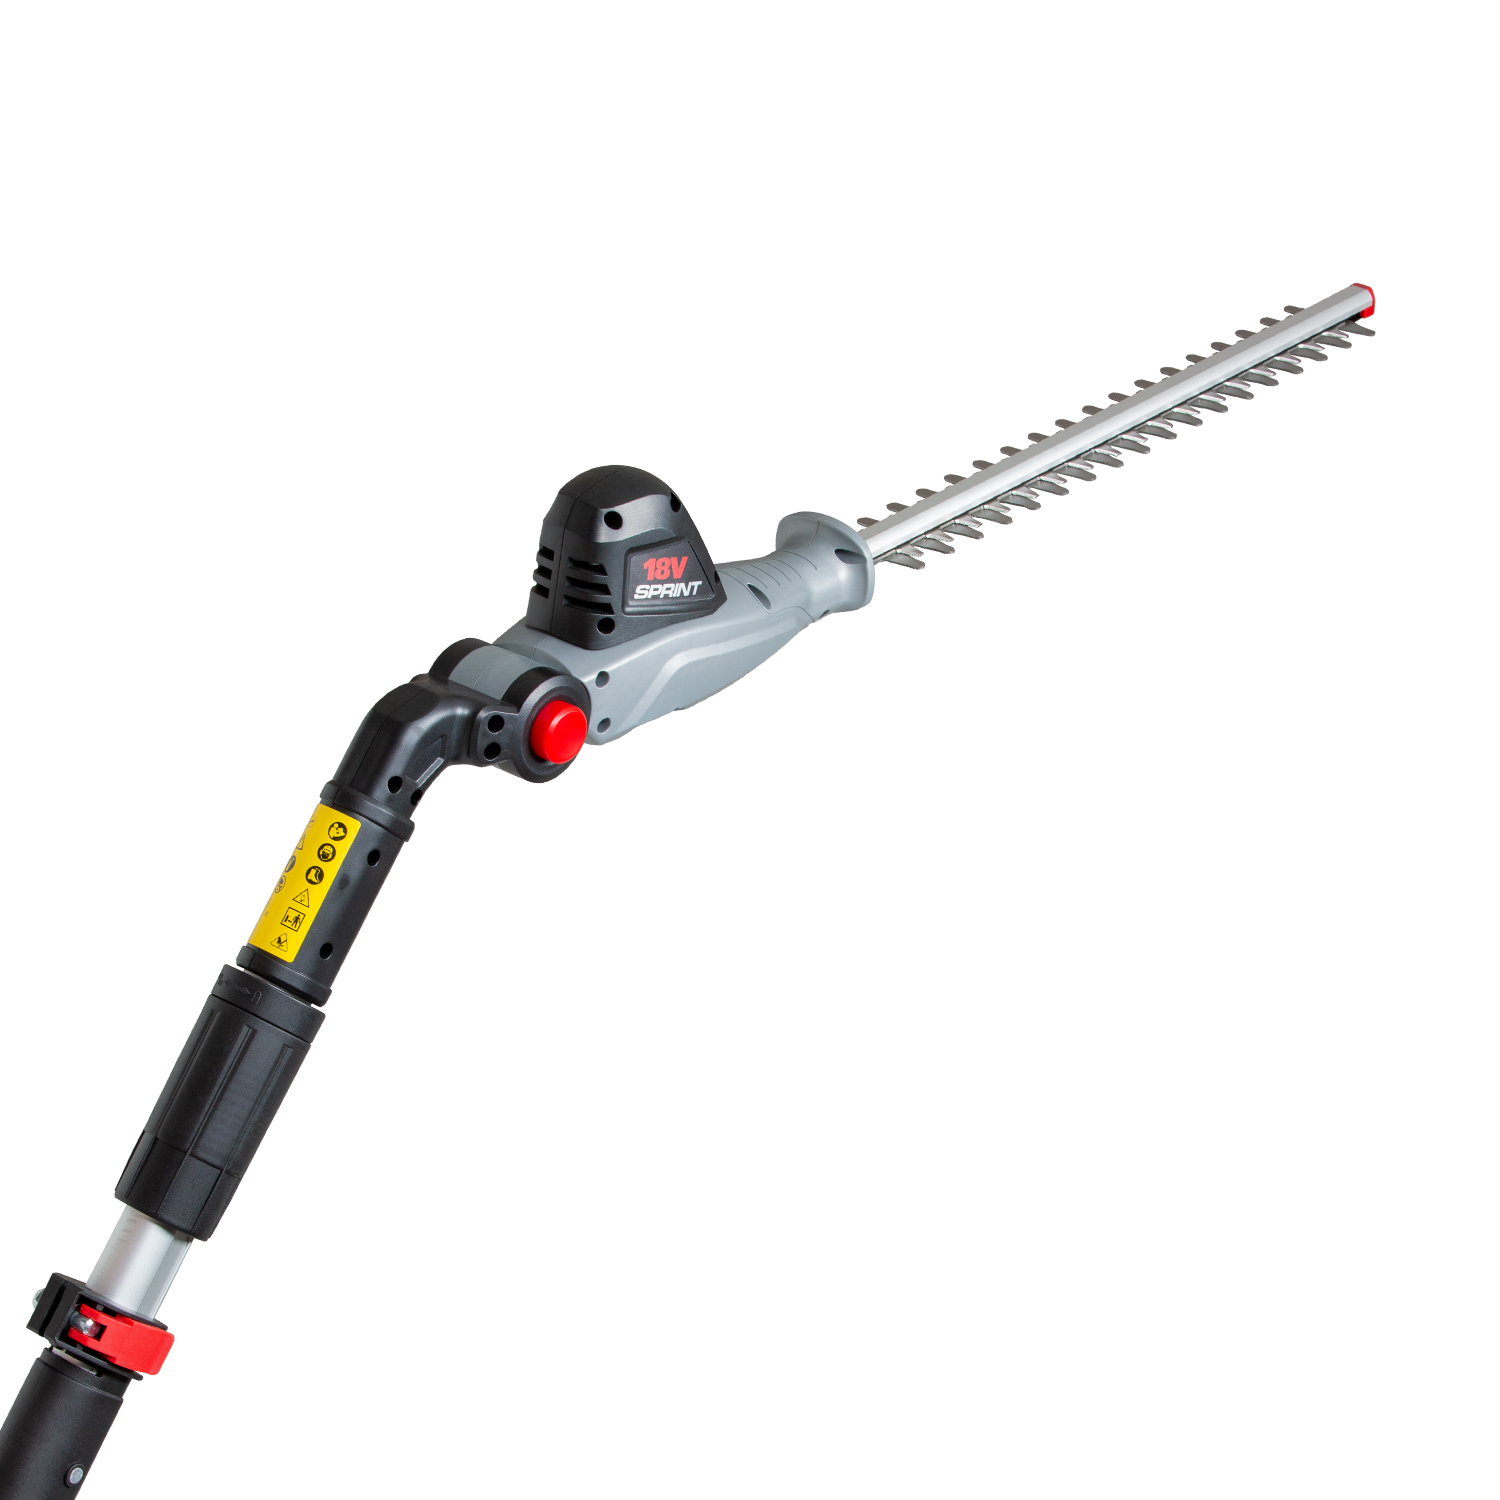 18V LiIon Cordless Pole Saw  Hedge Trimmer 2in1 Body